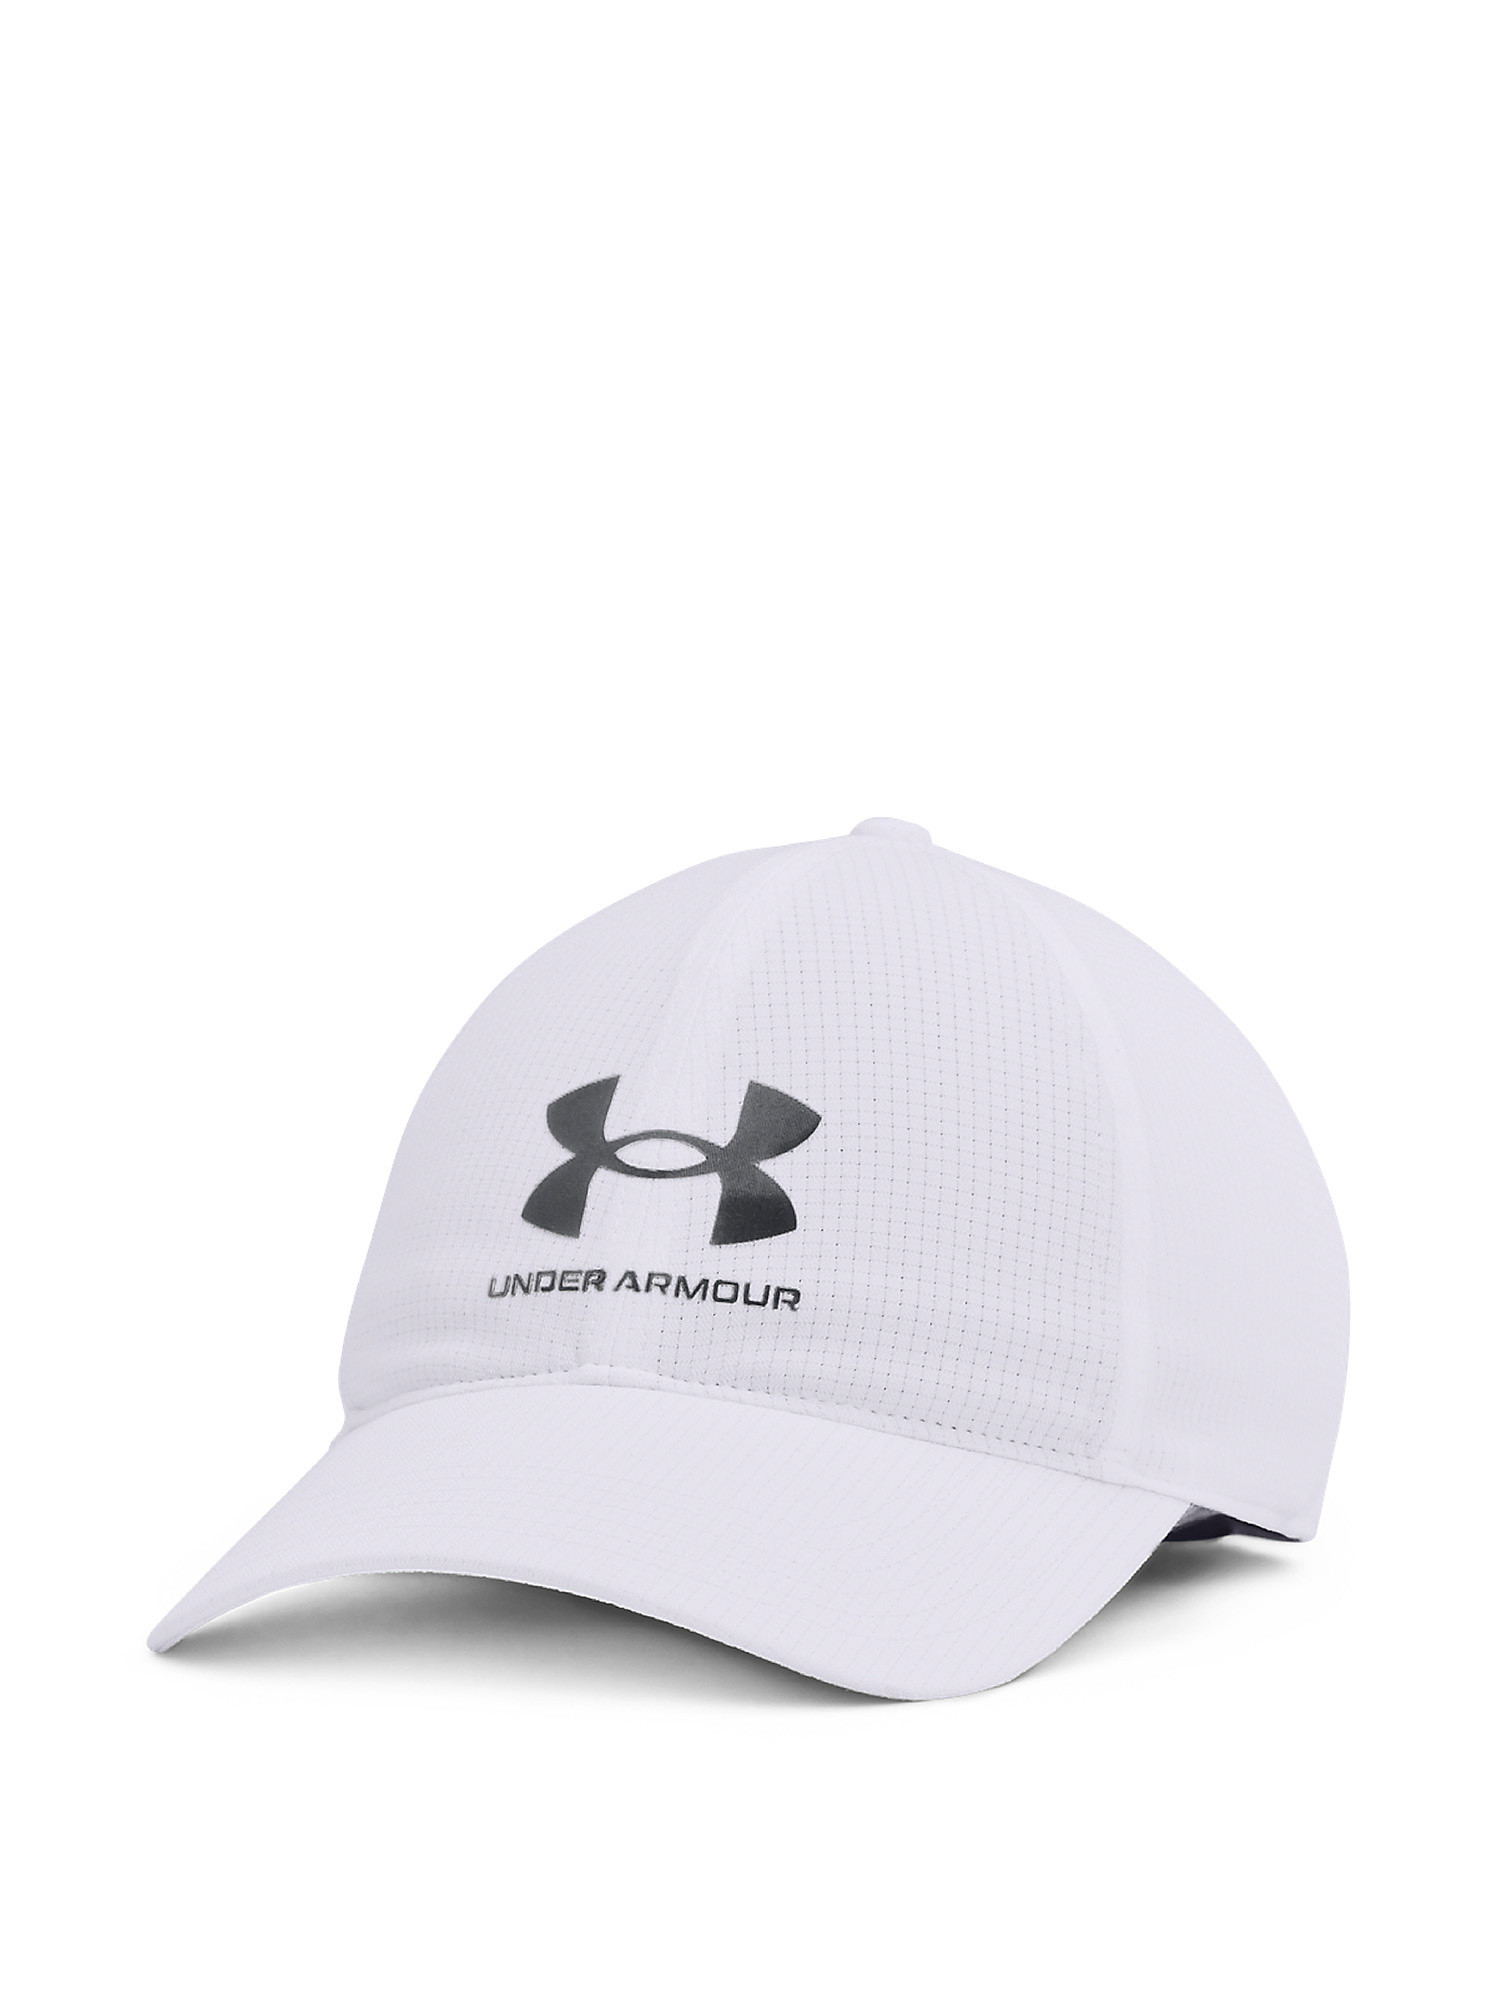 Under Armour - Cappello UA Iso-Chill ArmourVent™ Adjustable, Bianco, large image number 0